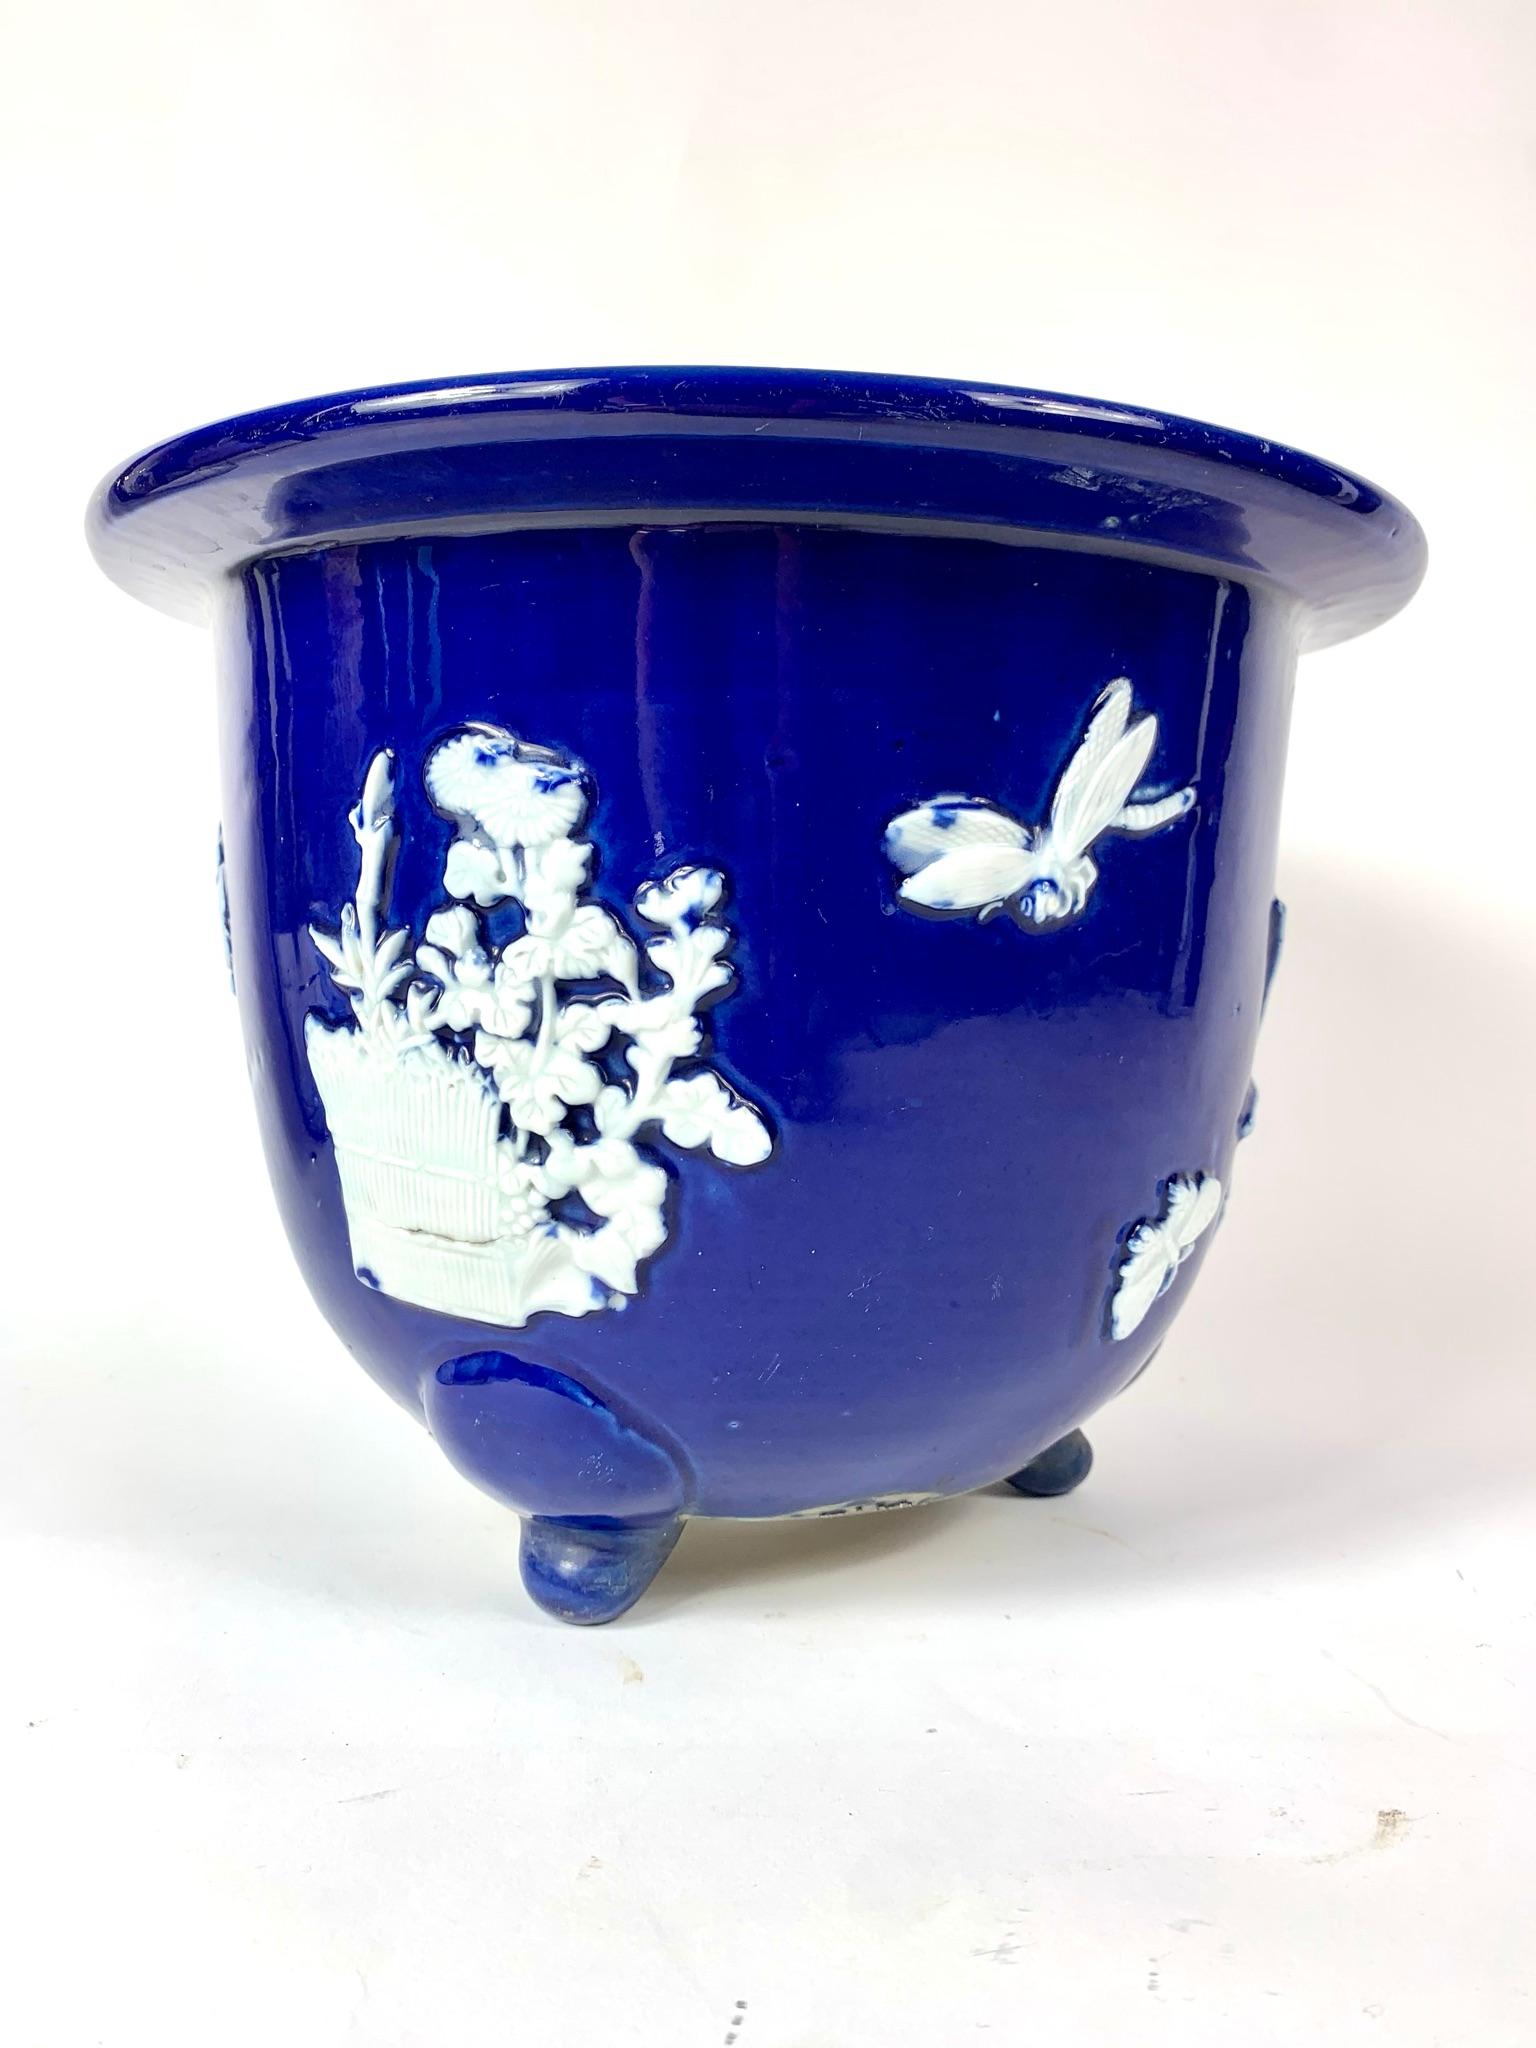 Porcelain Chinese Blue Pate Sur Pate Planter Jardinière with Flowers and Bug